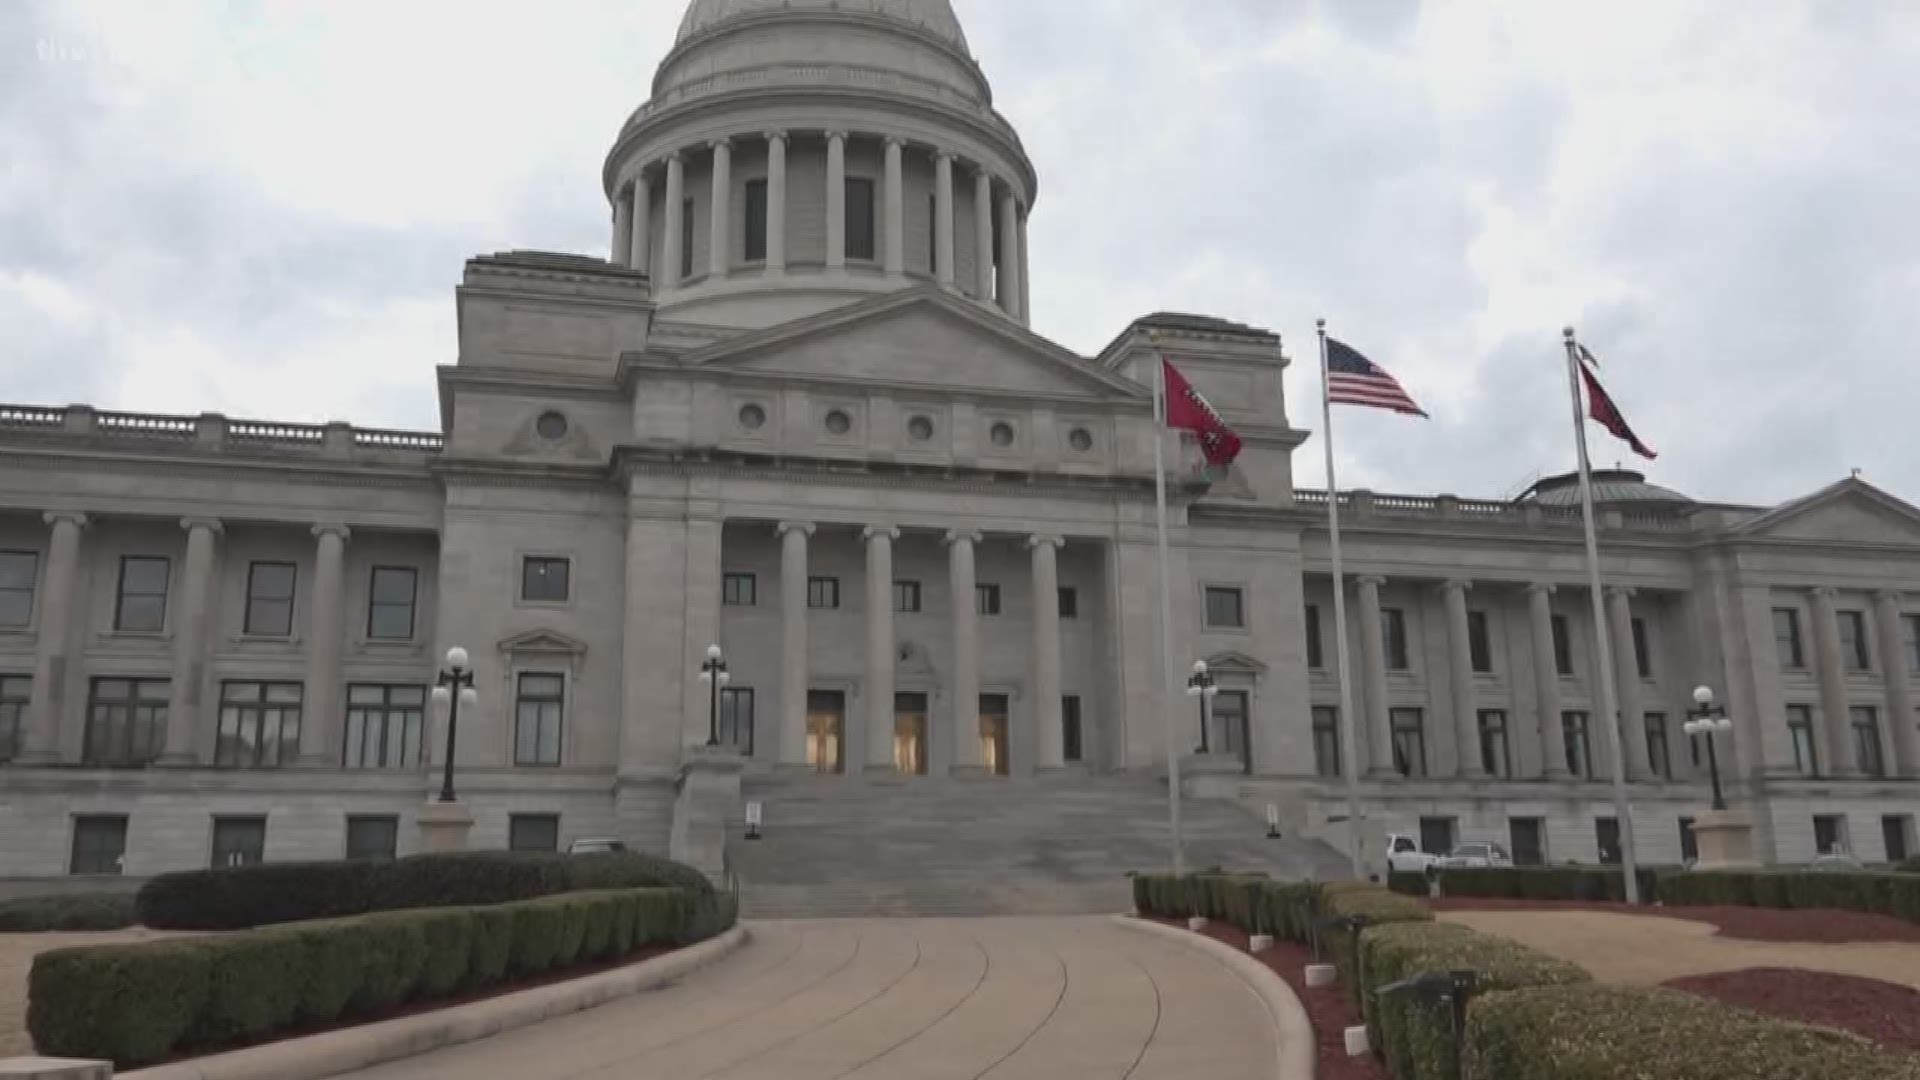 The Arkansas Supreme Court disqualified the proposal and ordered election officials to not count votes cast for or against it.